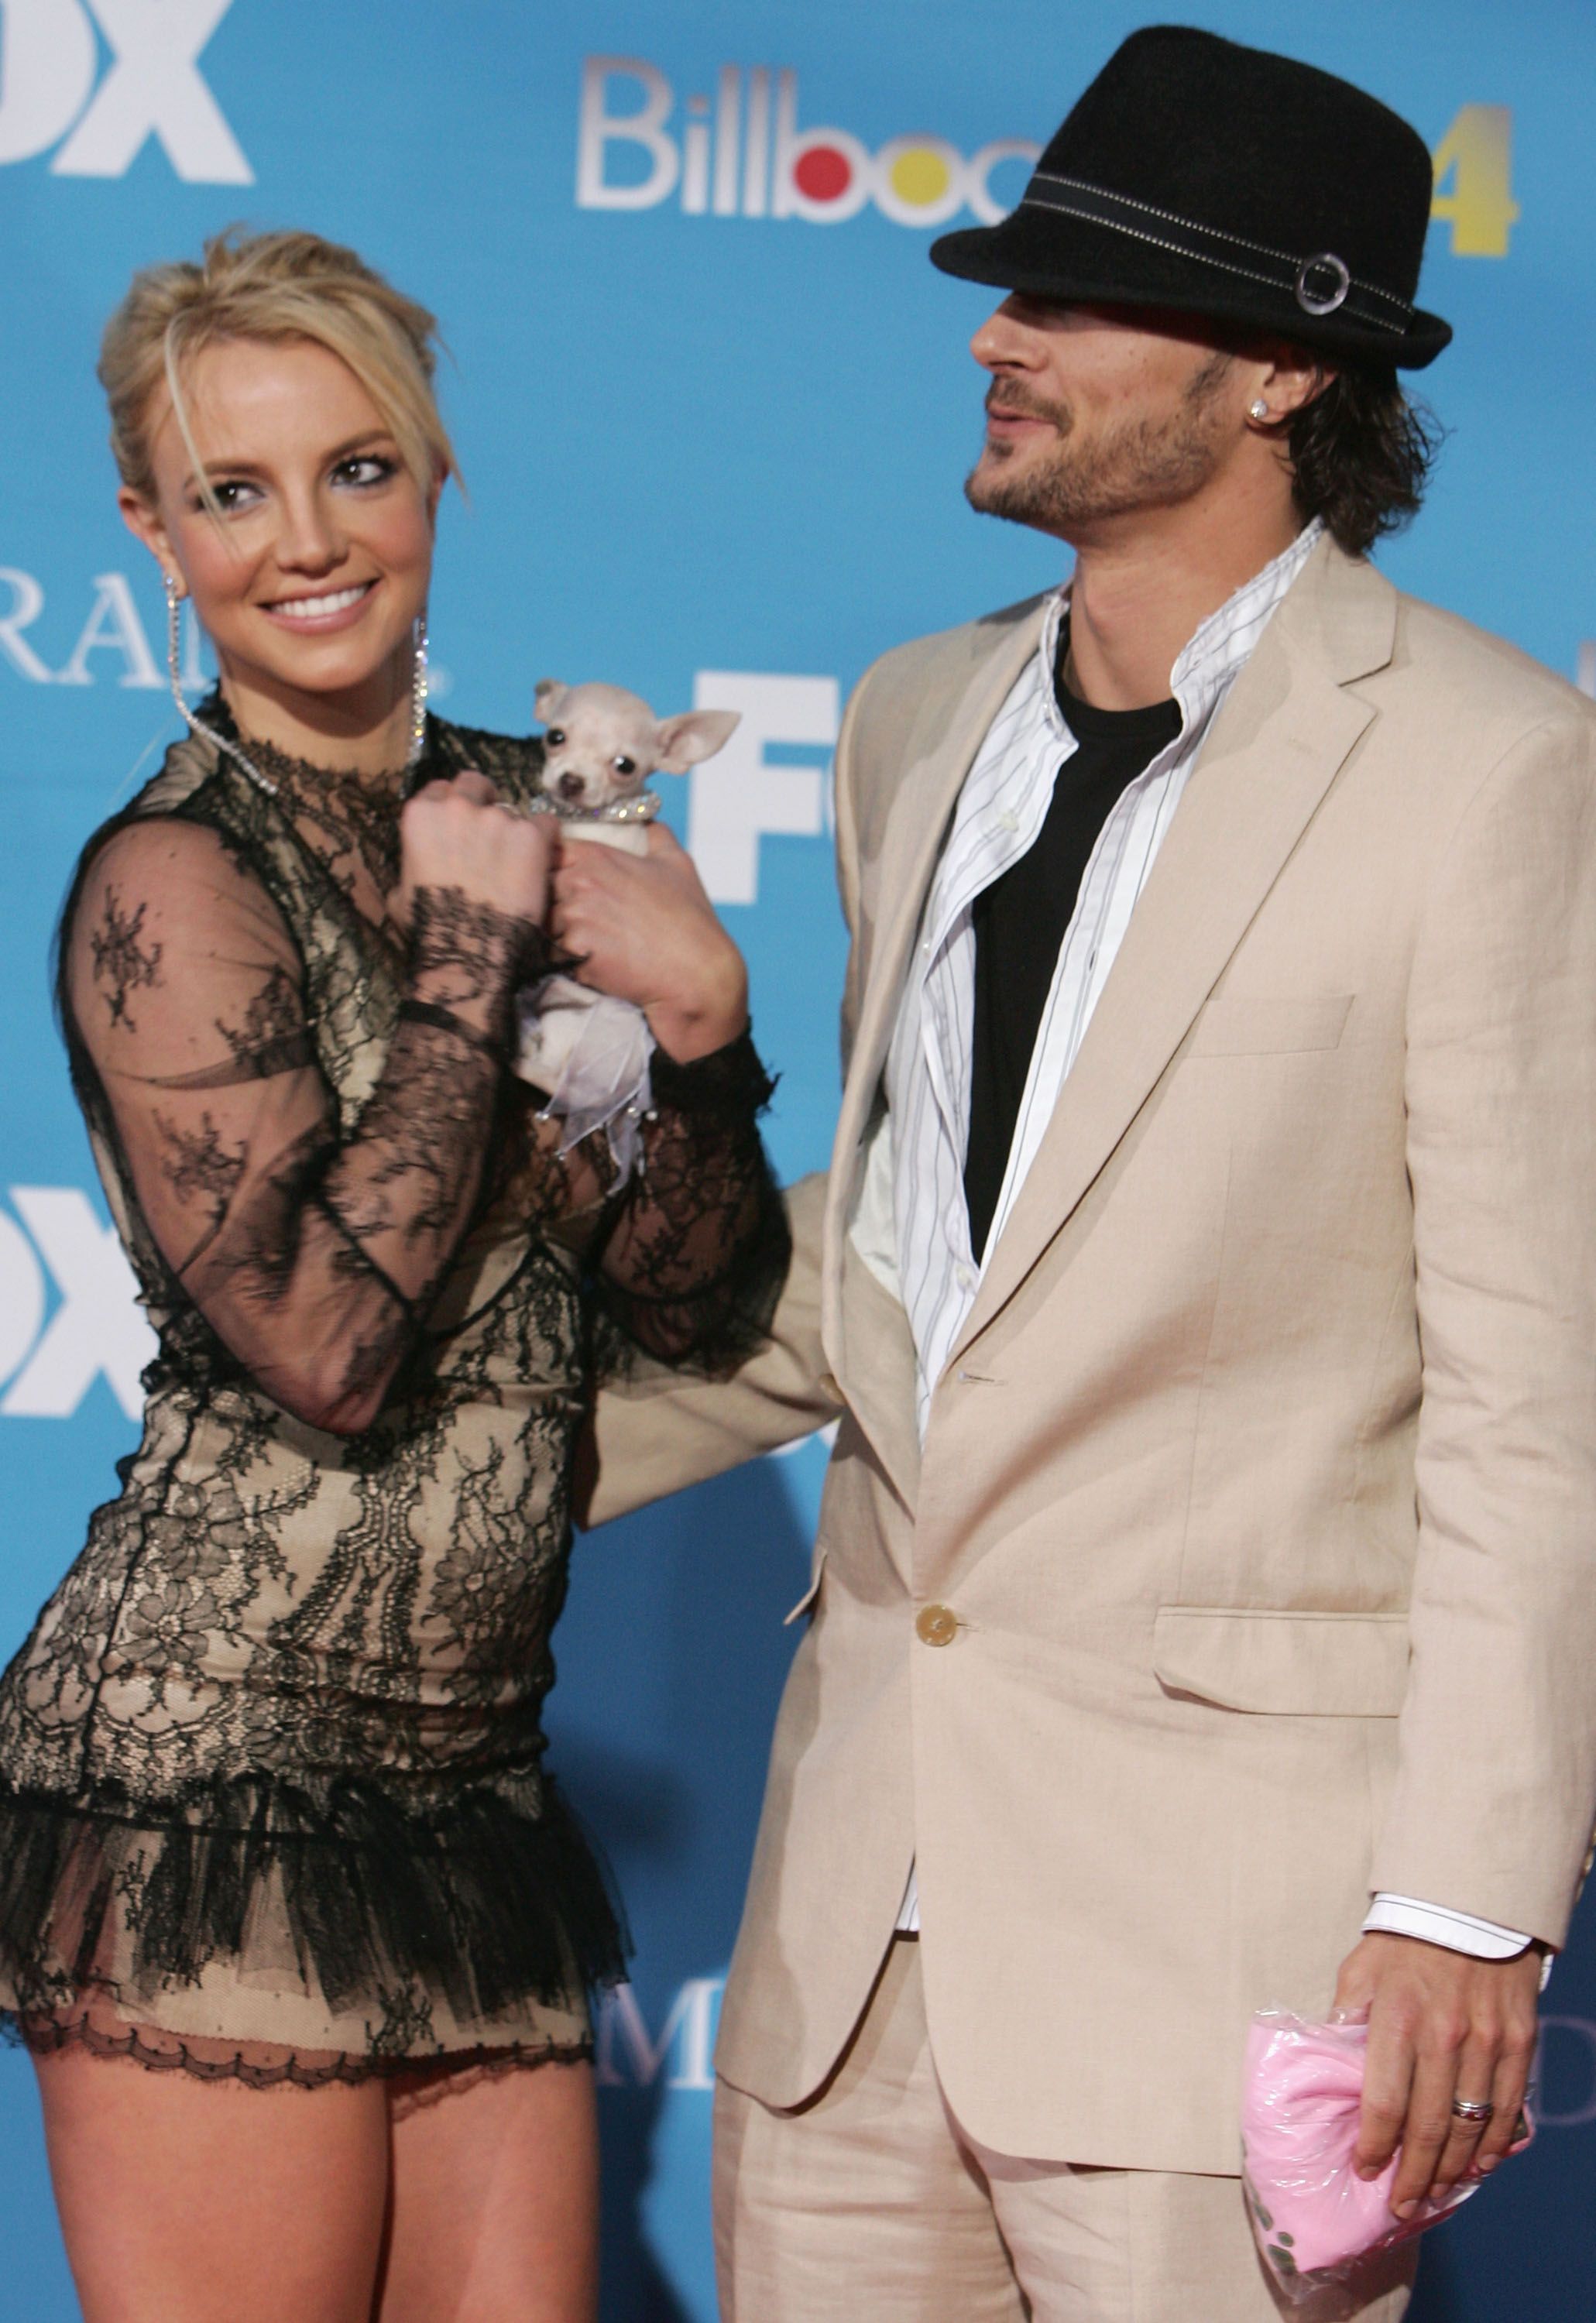 Britney Spears and husband Kevin Federline arrive at the 2004 Billboard Music Awards. | Source: Getty Images